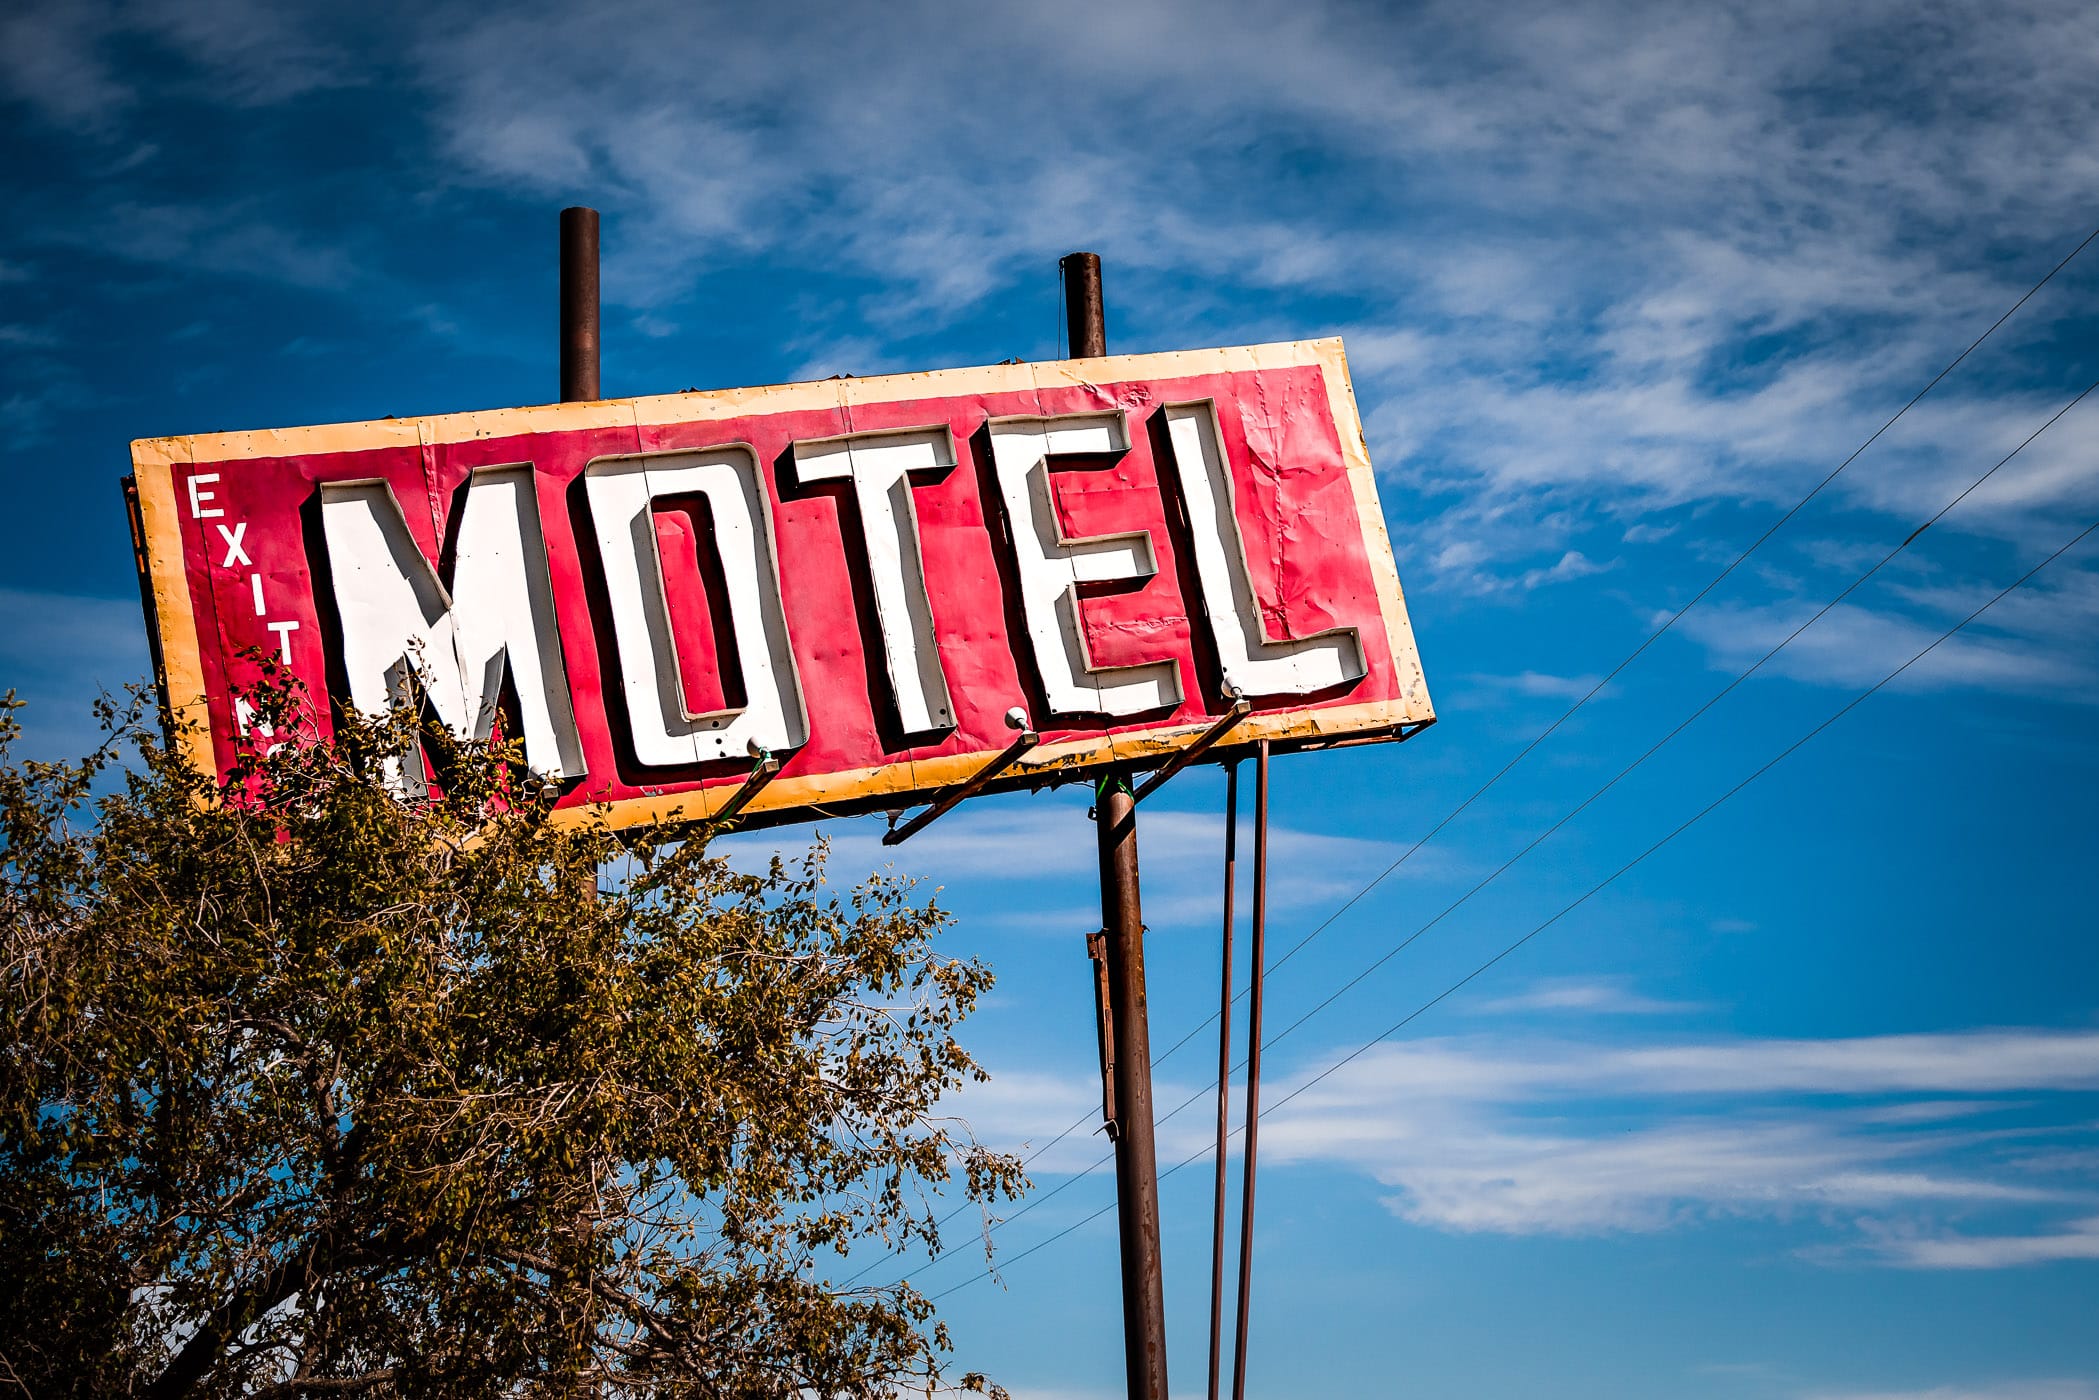 A decrepit motel sign spotted in Adrian, Texas.